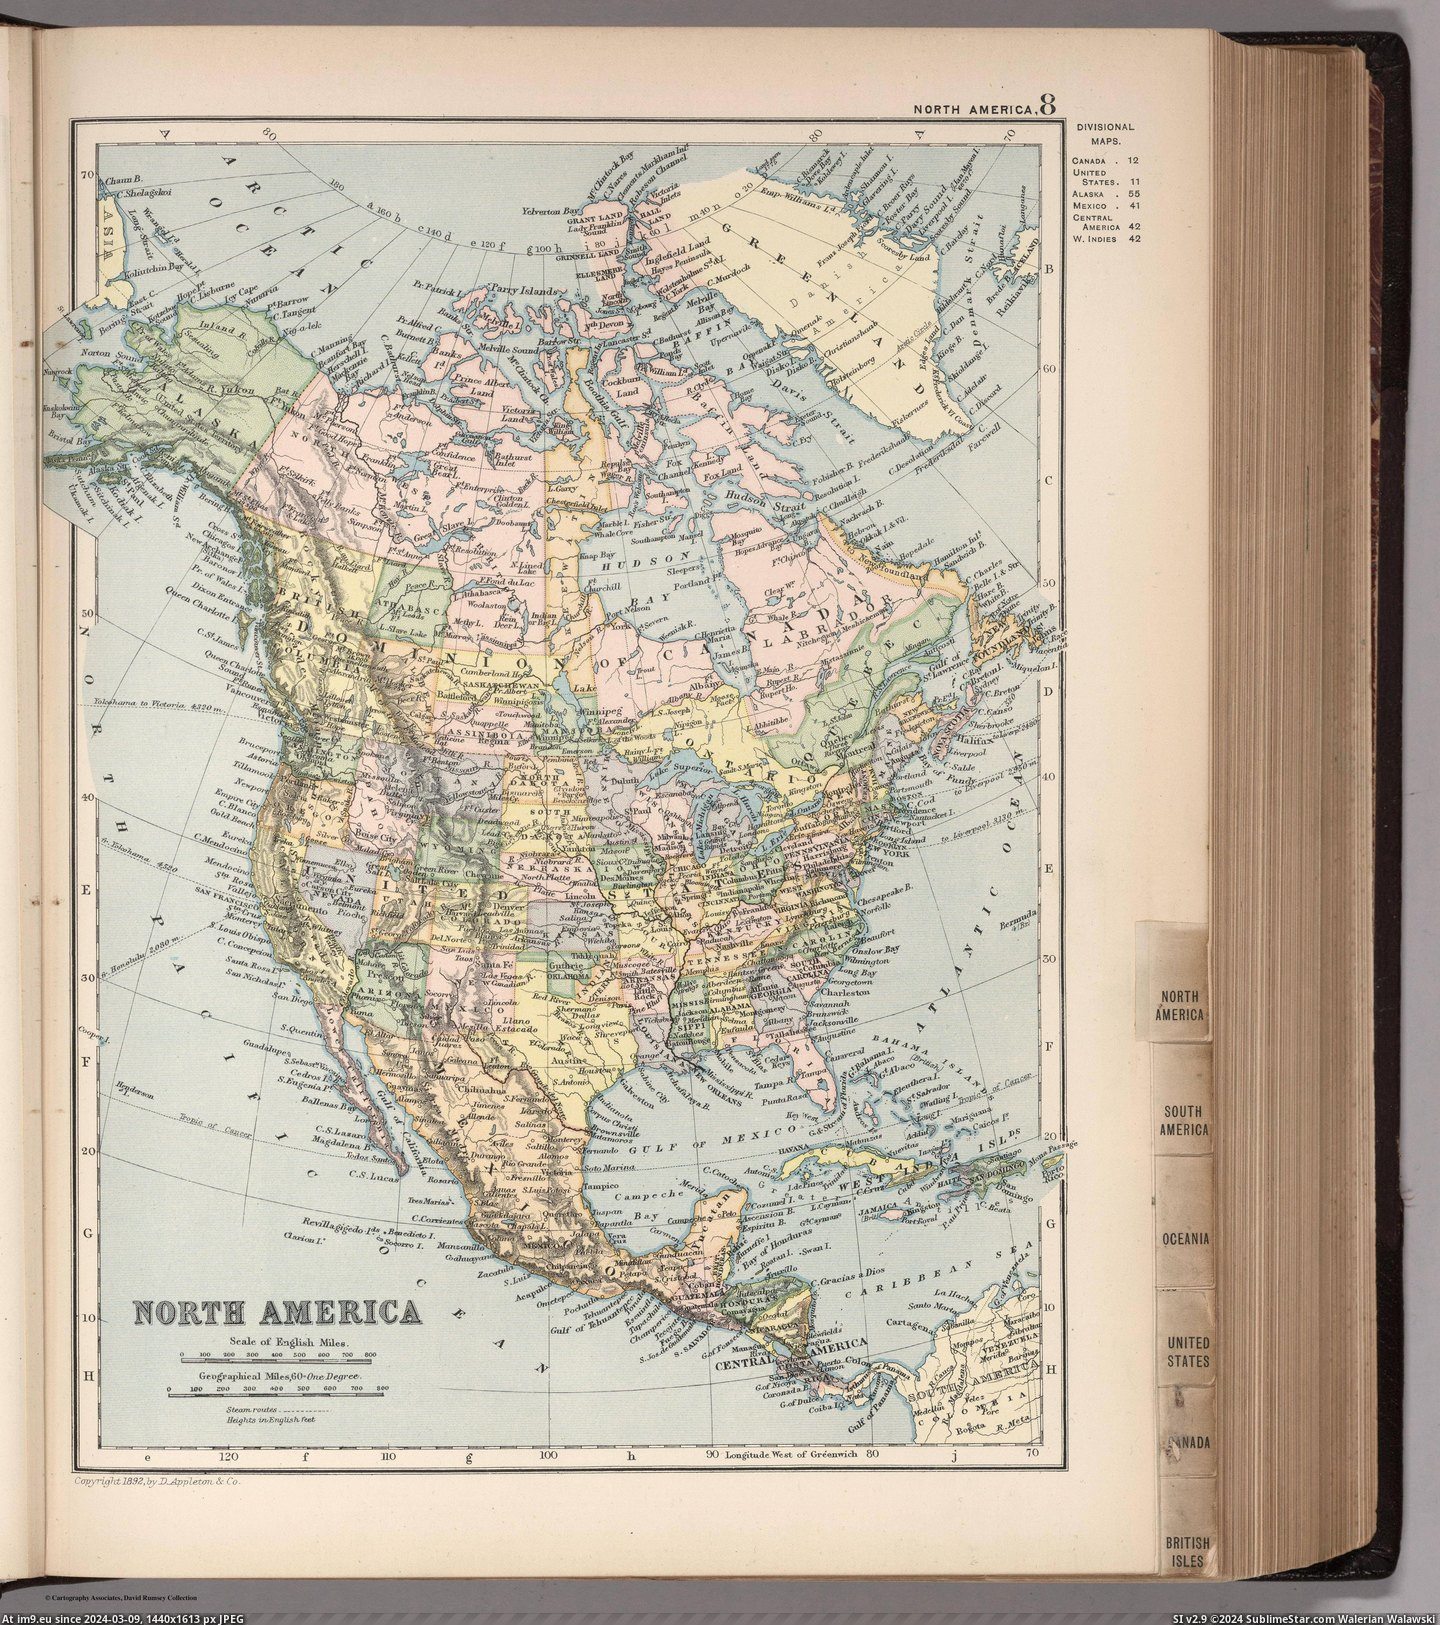 #North #Appleton #America [Mapporn] North America in 1892, made by D. Appleton & Co. [4270x4795] Pic. (Image of album My r/MAPS favs))